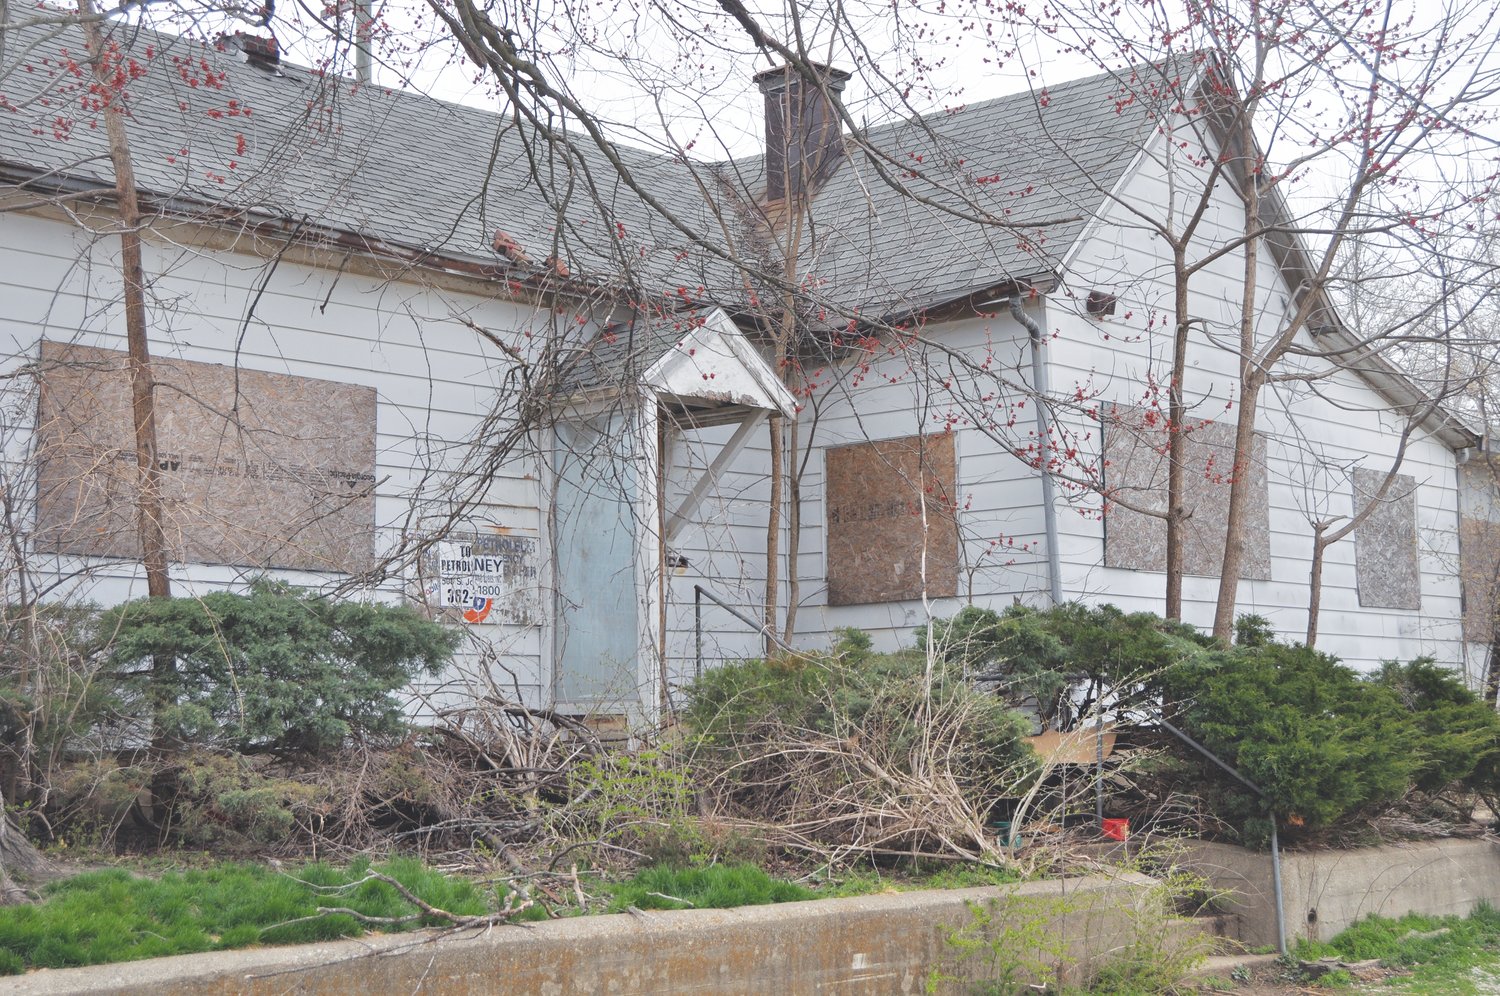 The former Toney Petroleum building is shown here Thursday. The Crawfordsville Street Depatment will re-board parts of the building following complaints about stray cats on the site.